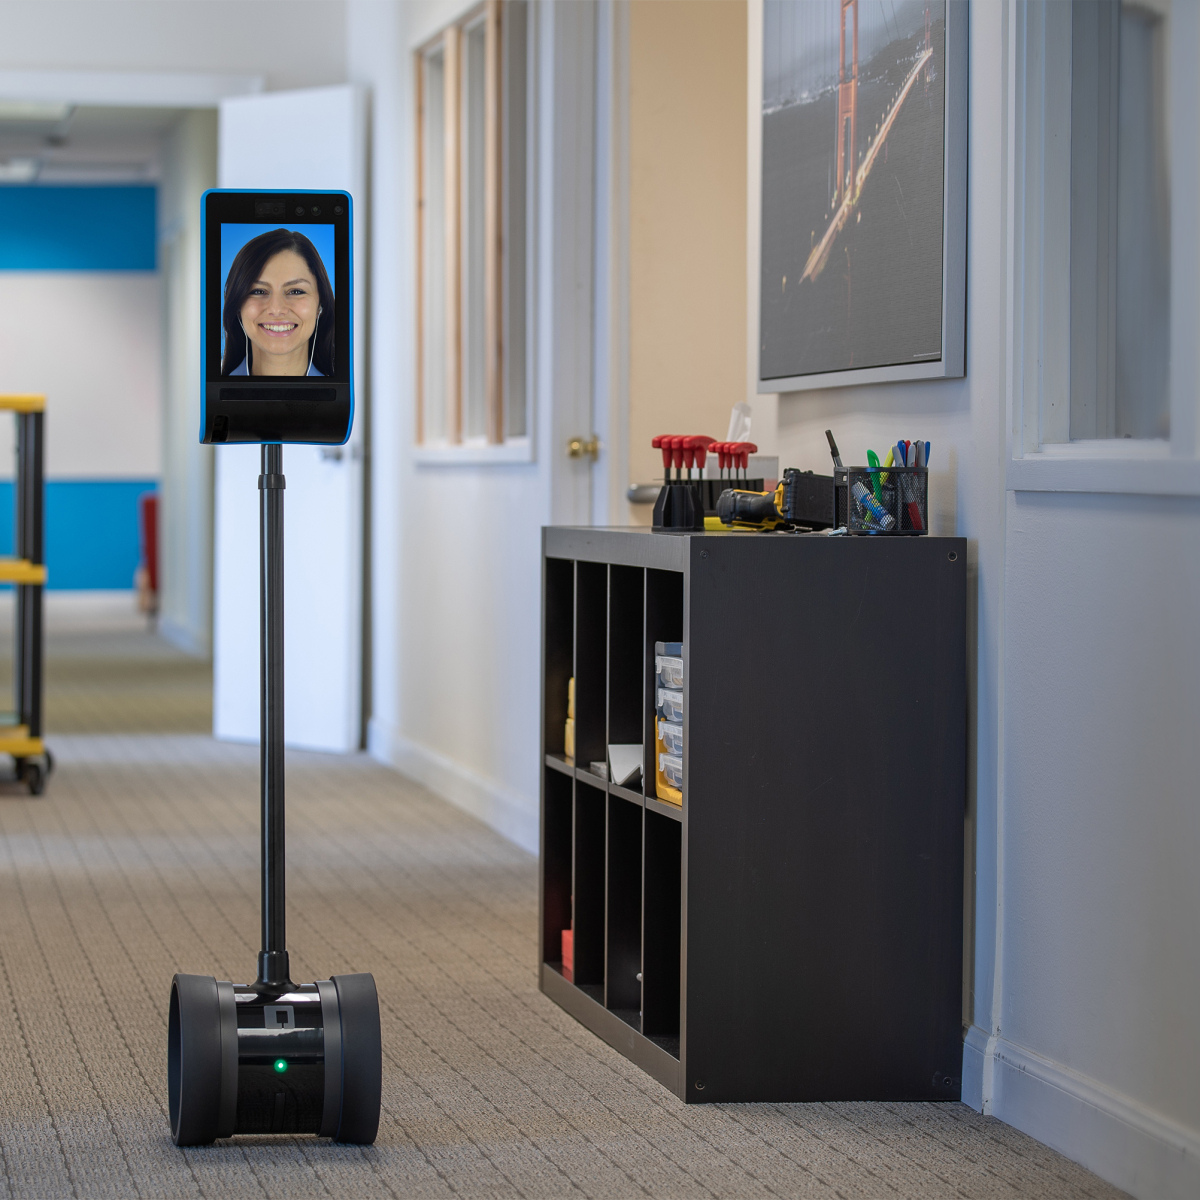 The Way forward for Presence: Exploring the Potential of Telepresence Robots